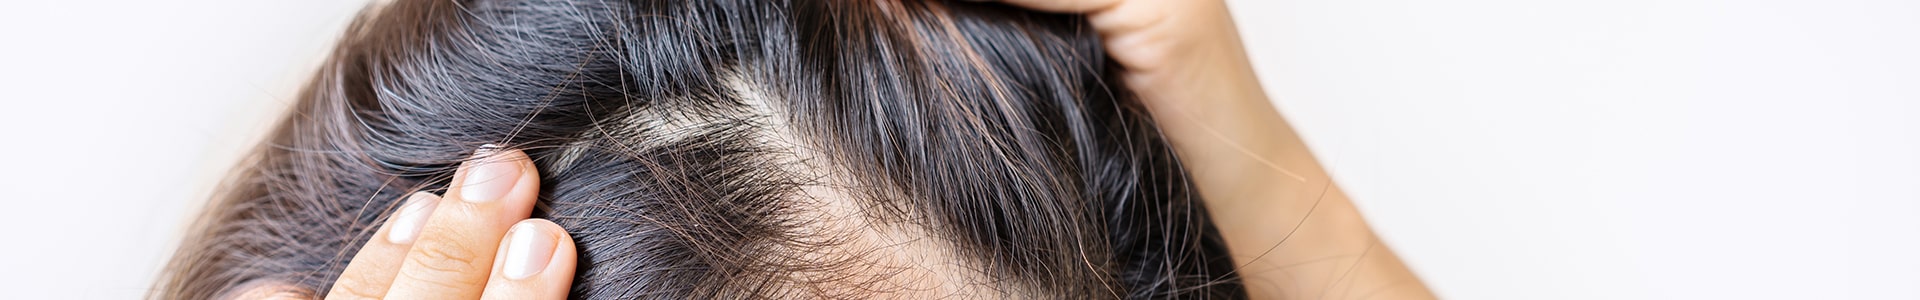 how to prepare for hair restoration procedure